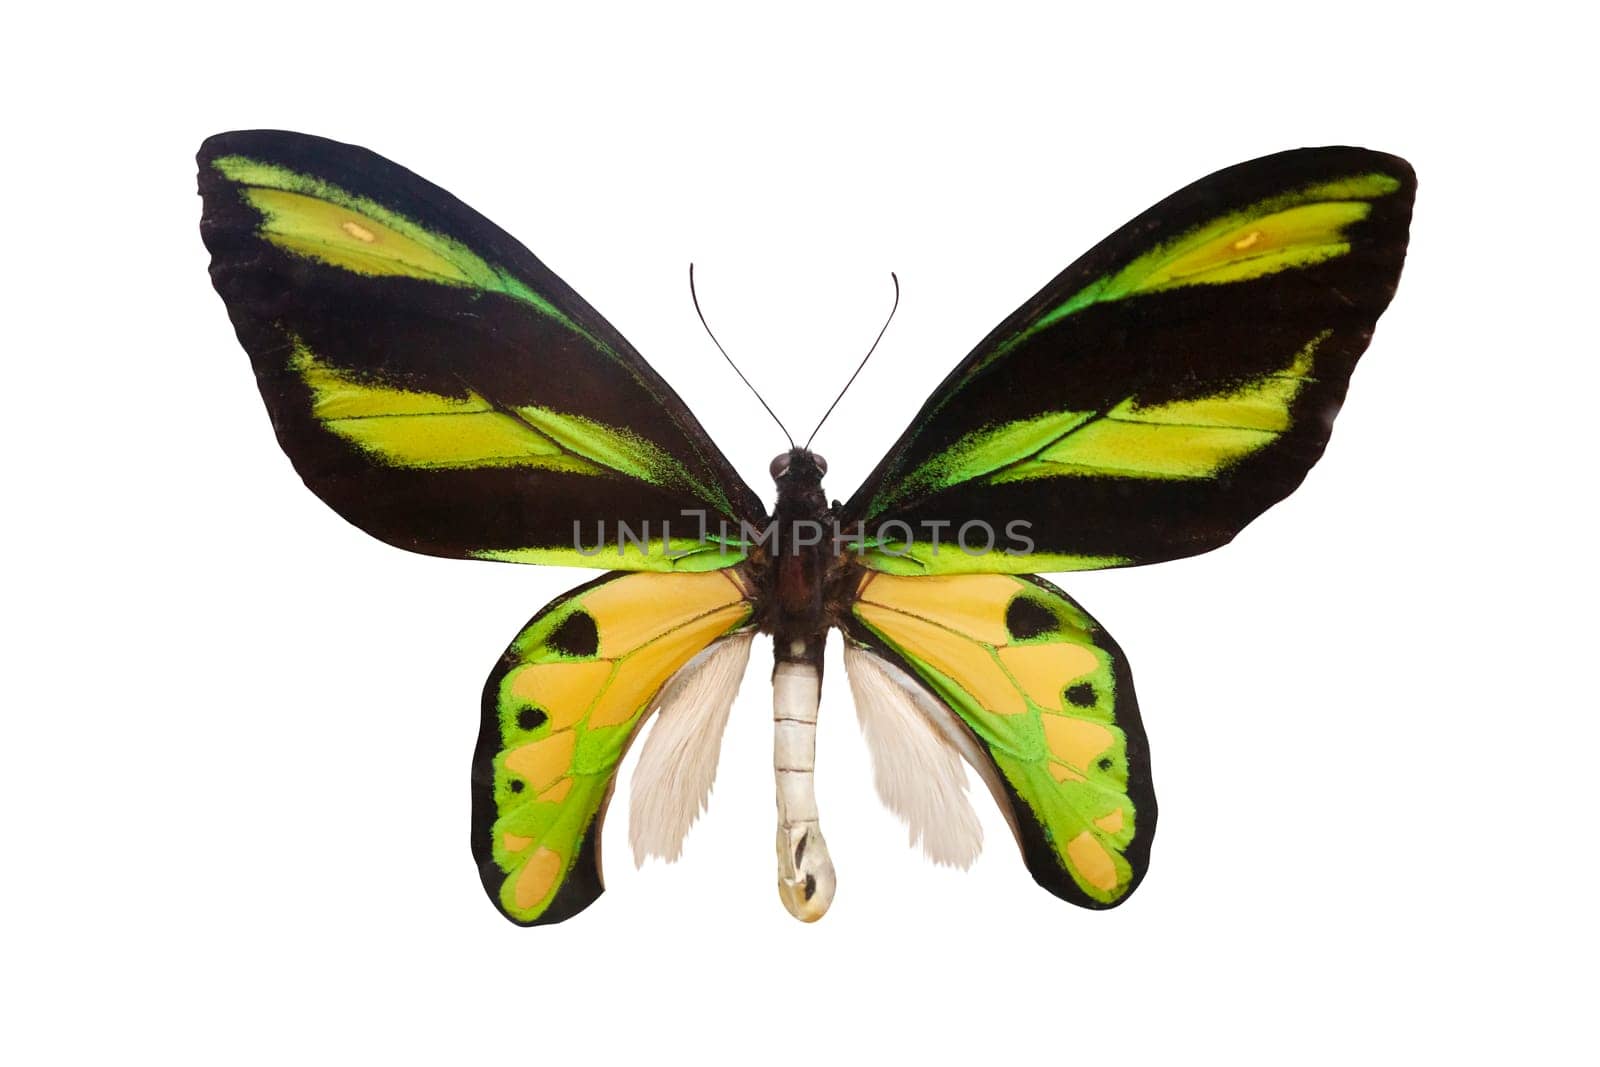 ornithoptera , butterfly isolated on white background, insects, spring